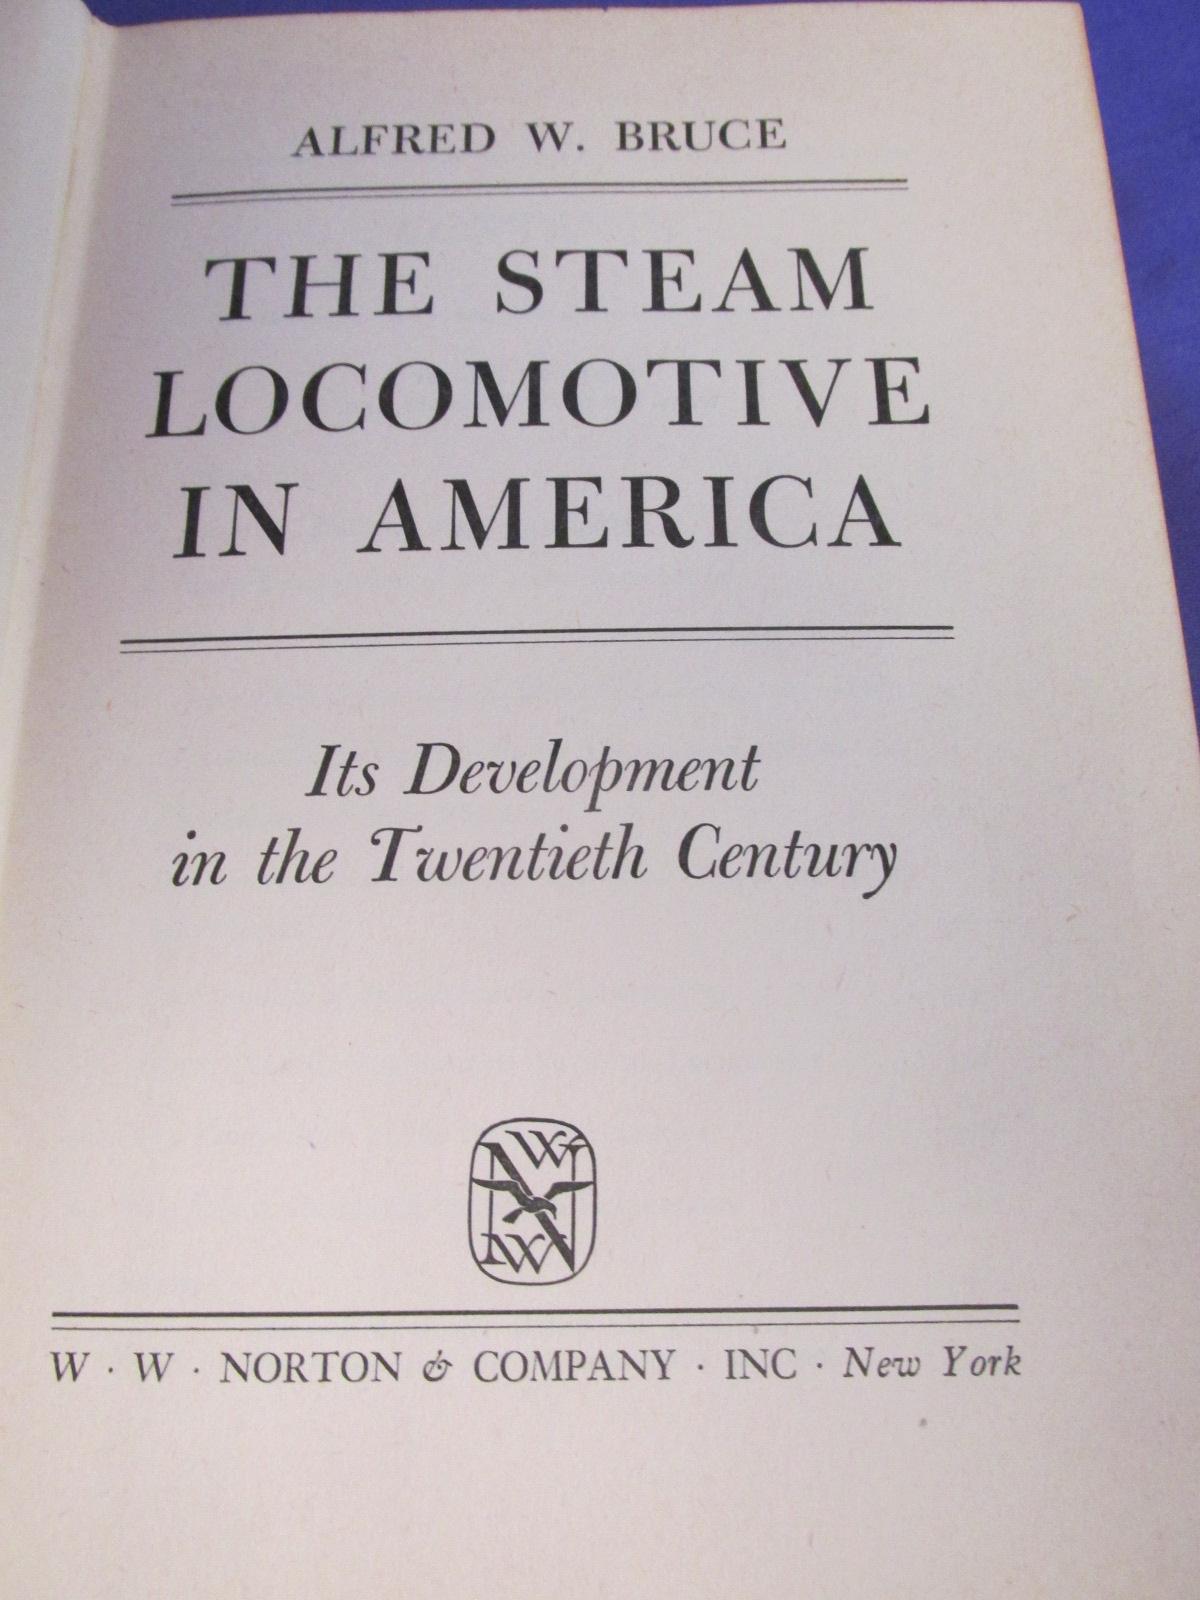 1952 First Edition Book “The Steam Locomotive in America” with 62pg. Photo section